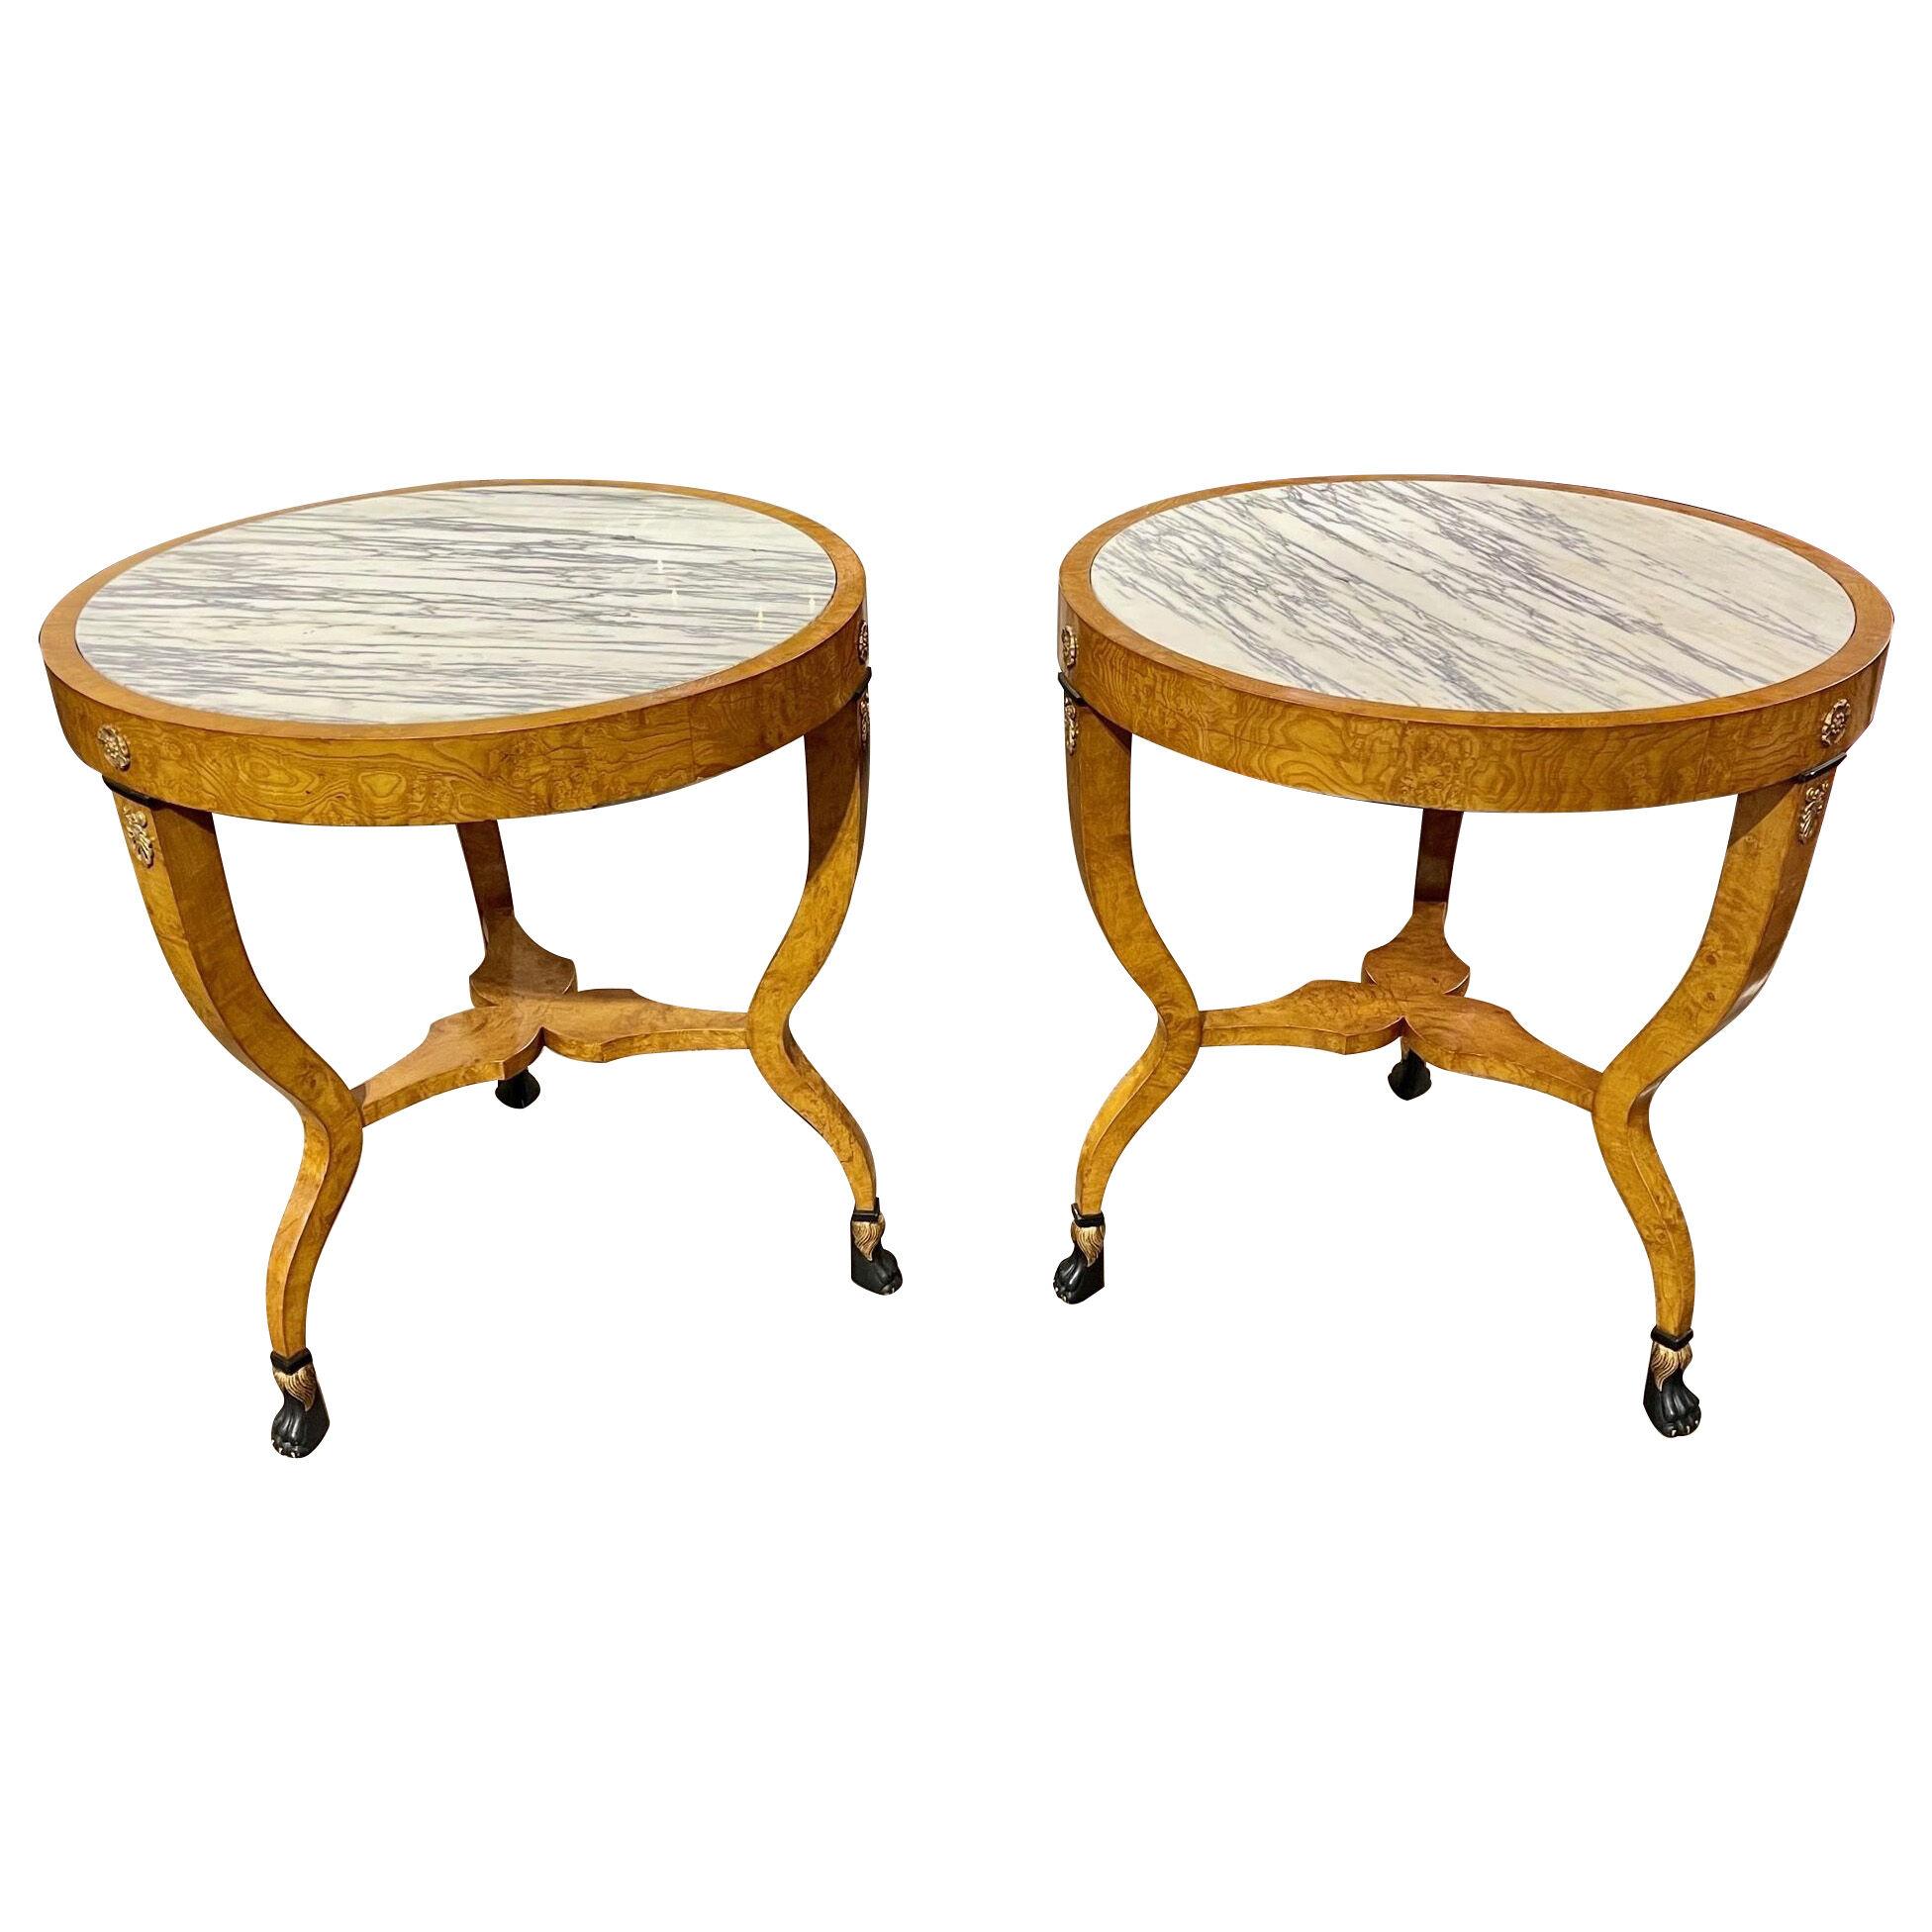 Pair of Italian Burl Walnut and Breccia Violet Marble Side Tables